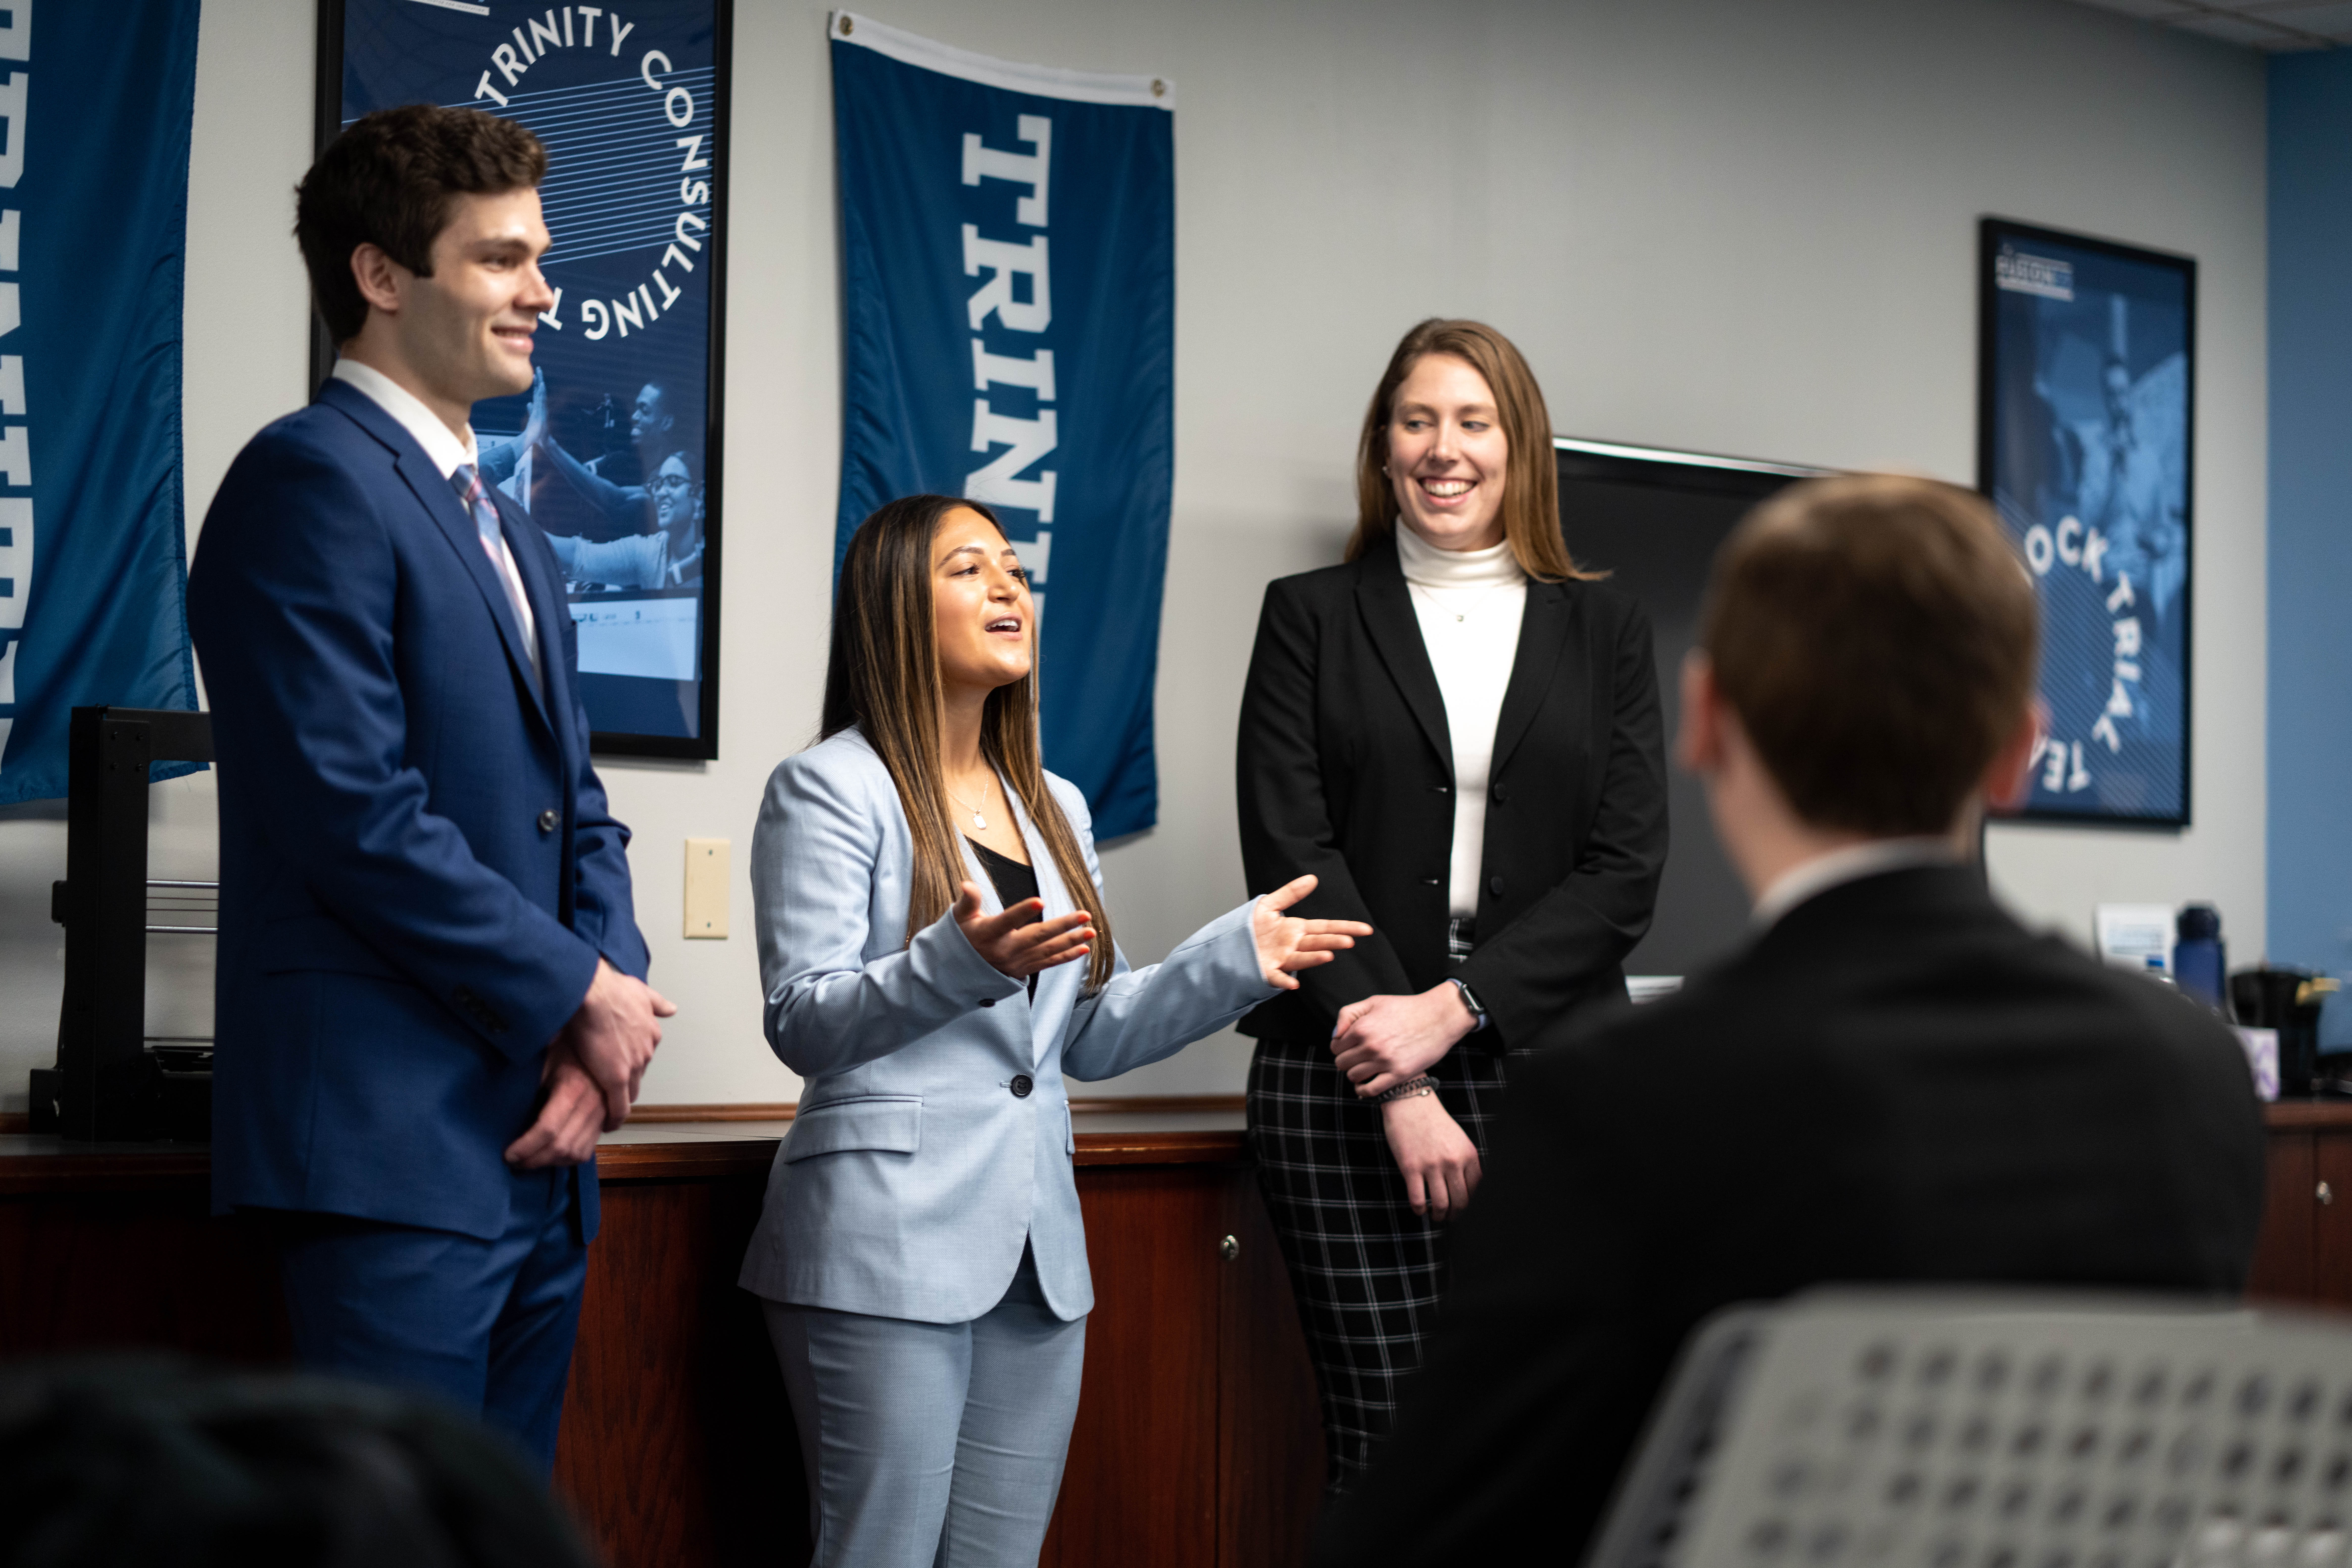 Trinity offers a variety of academic programs for students, ranging from psychology to business. The business program offers a unique balance of academic rigor, faith integration, hands-on learning, and leadership development.